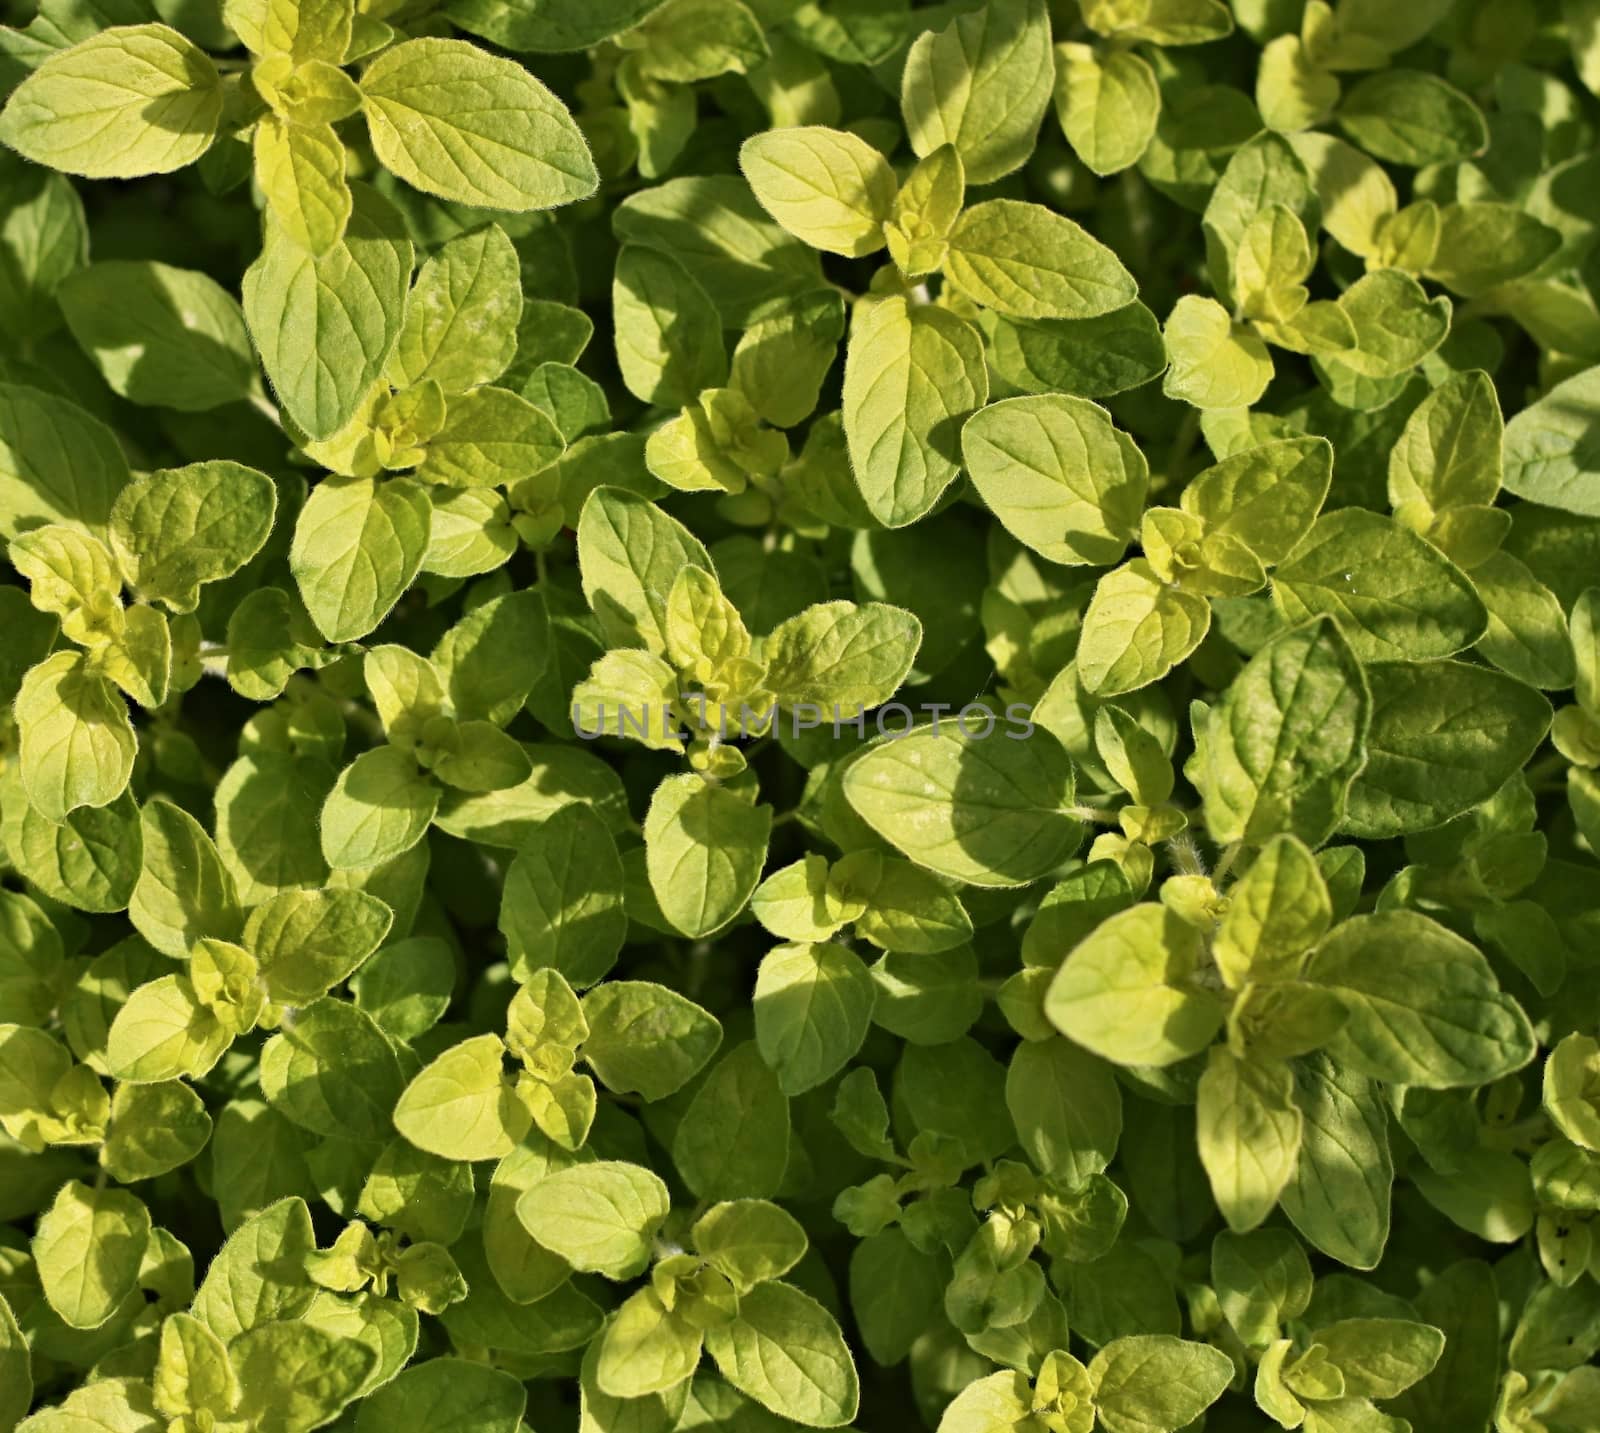 Green and aromatic oregano leaves in the herbs garden